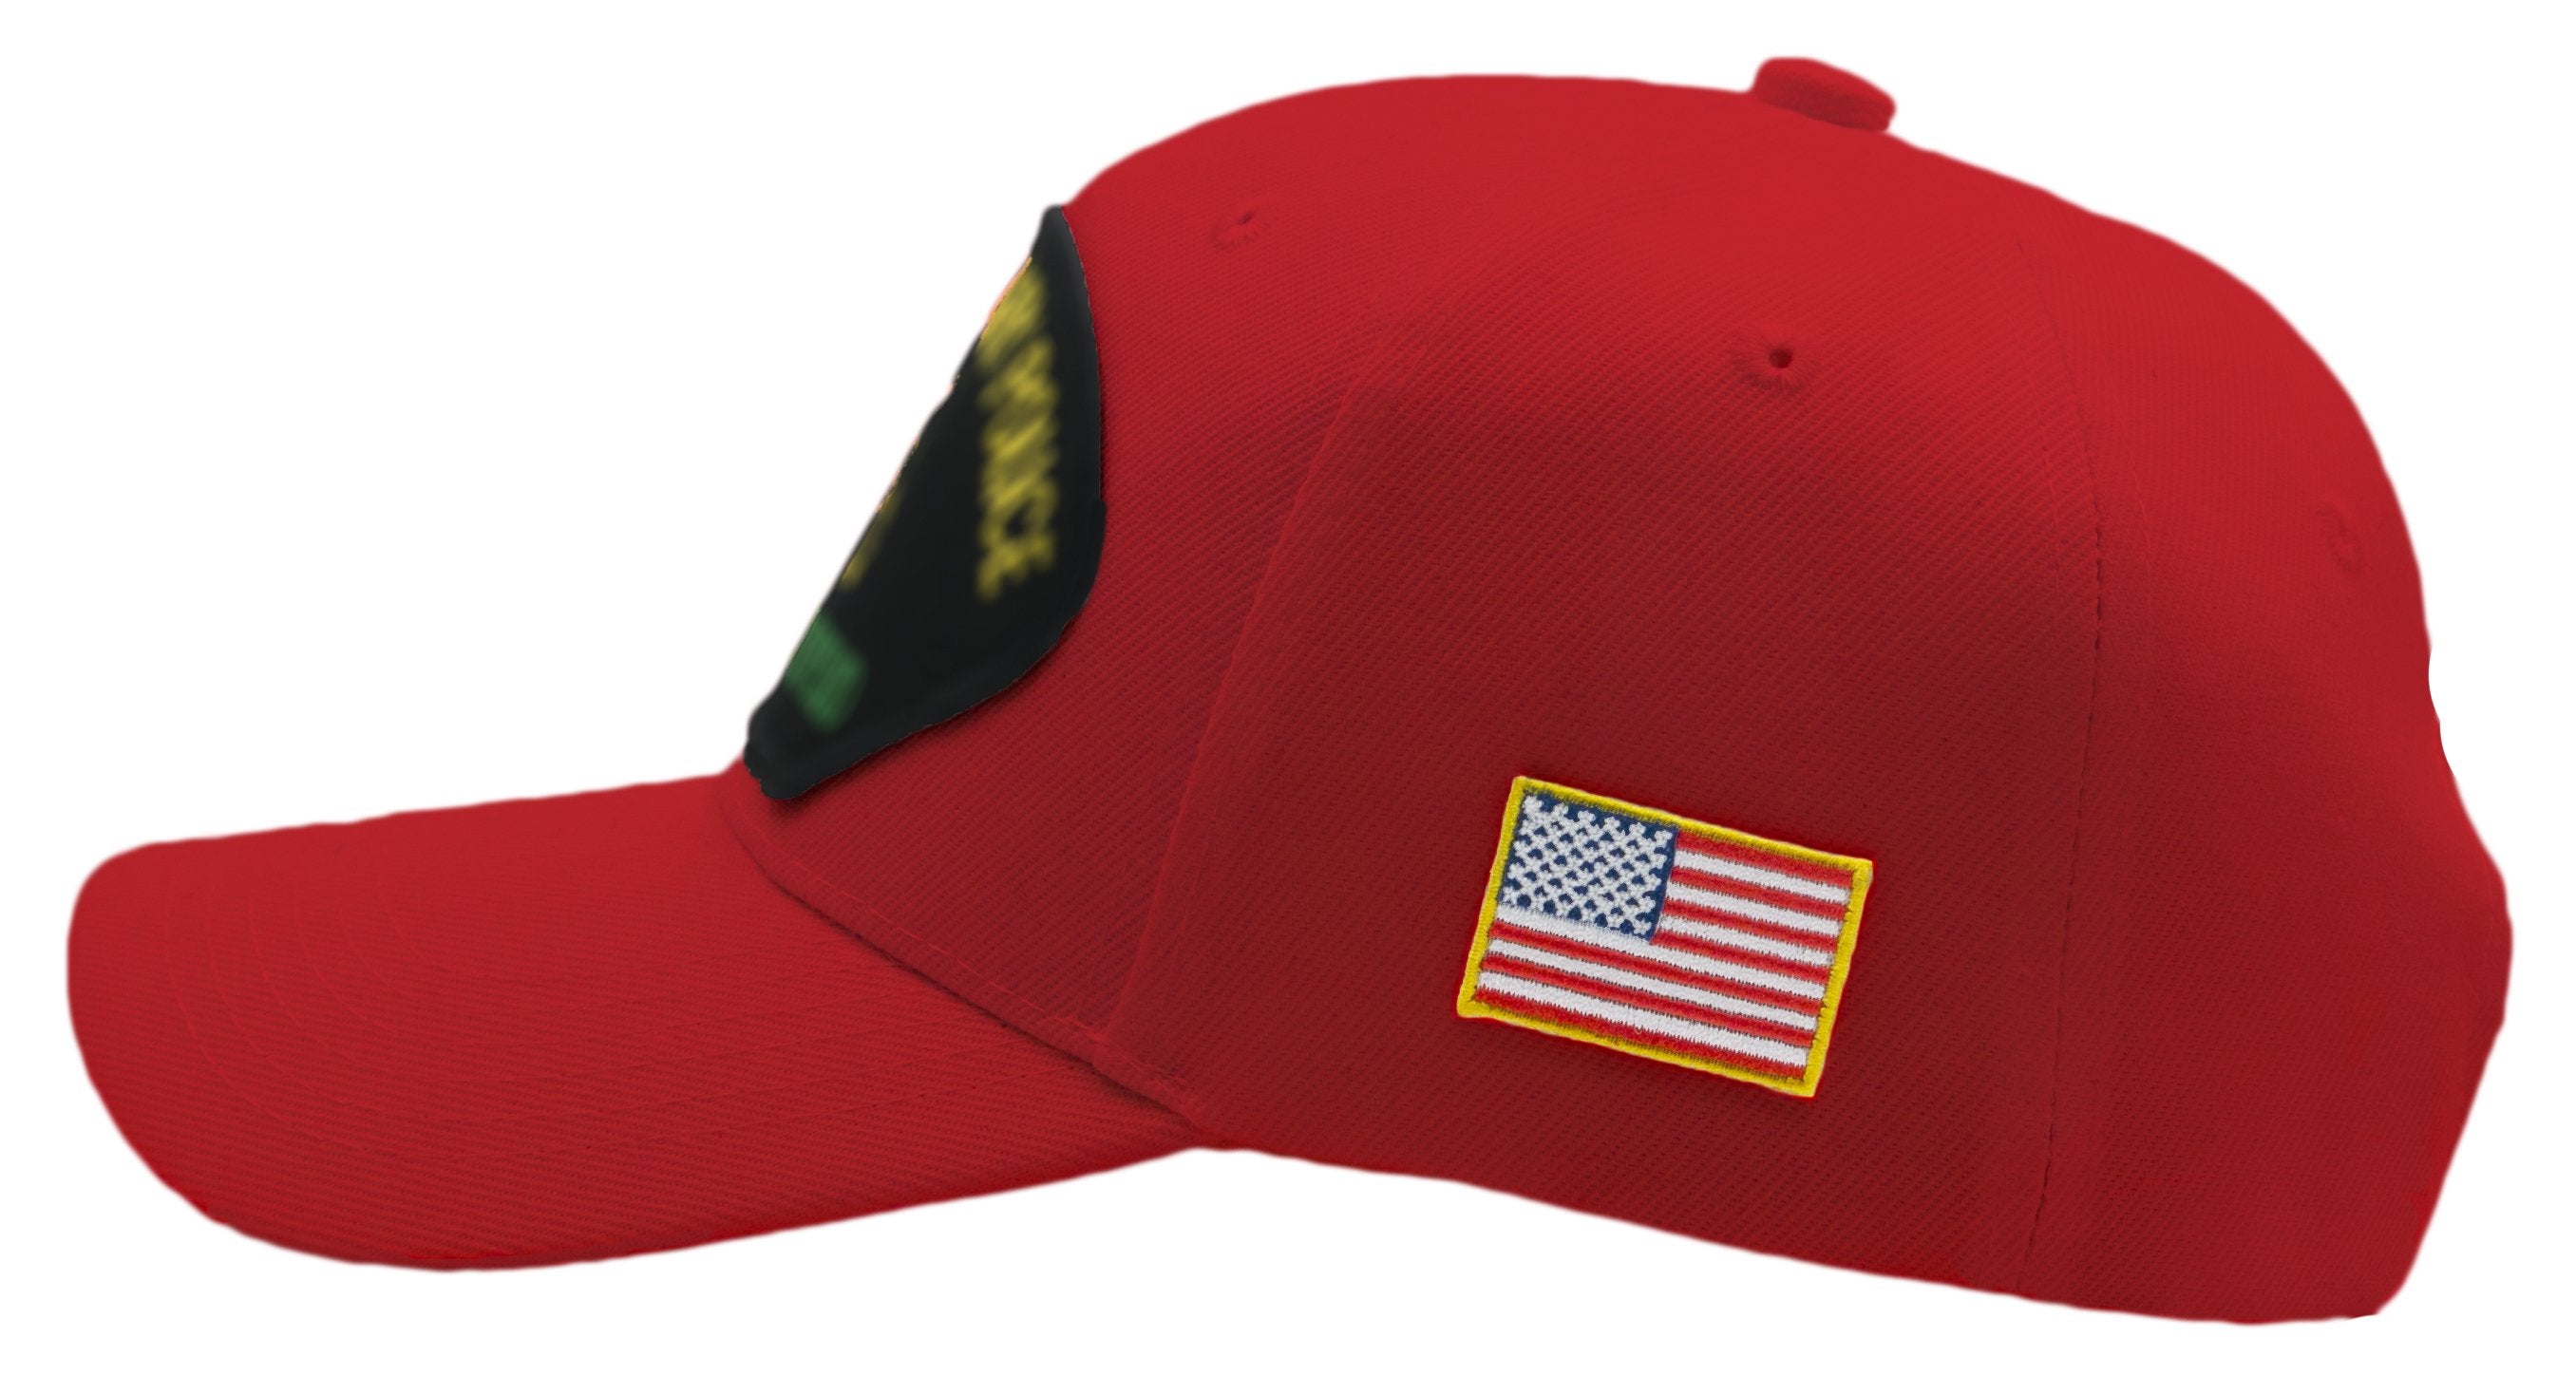 US Army Senior Aviator Hat - Multiple Colors Available